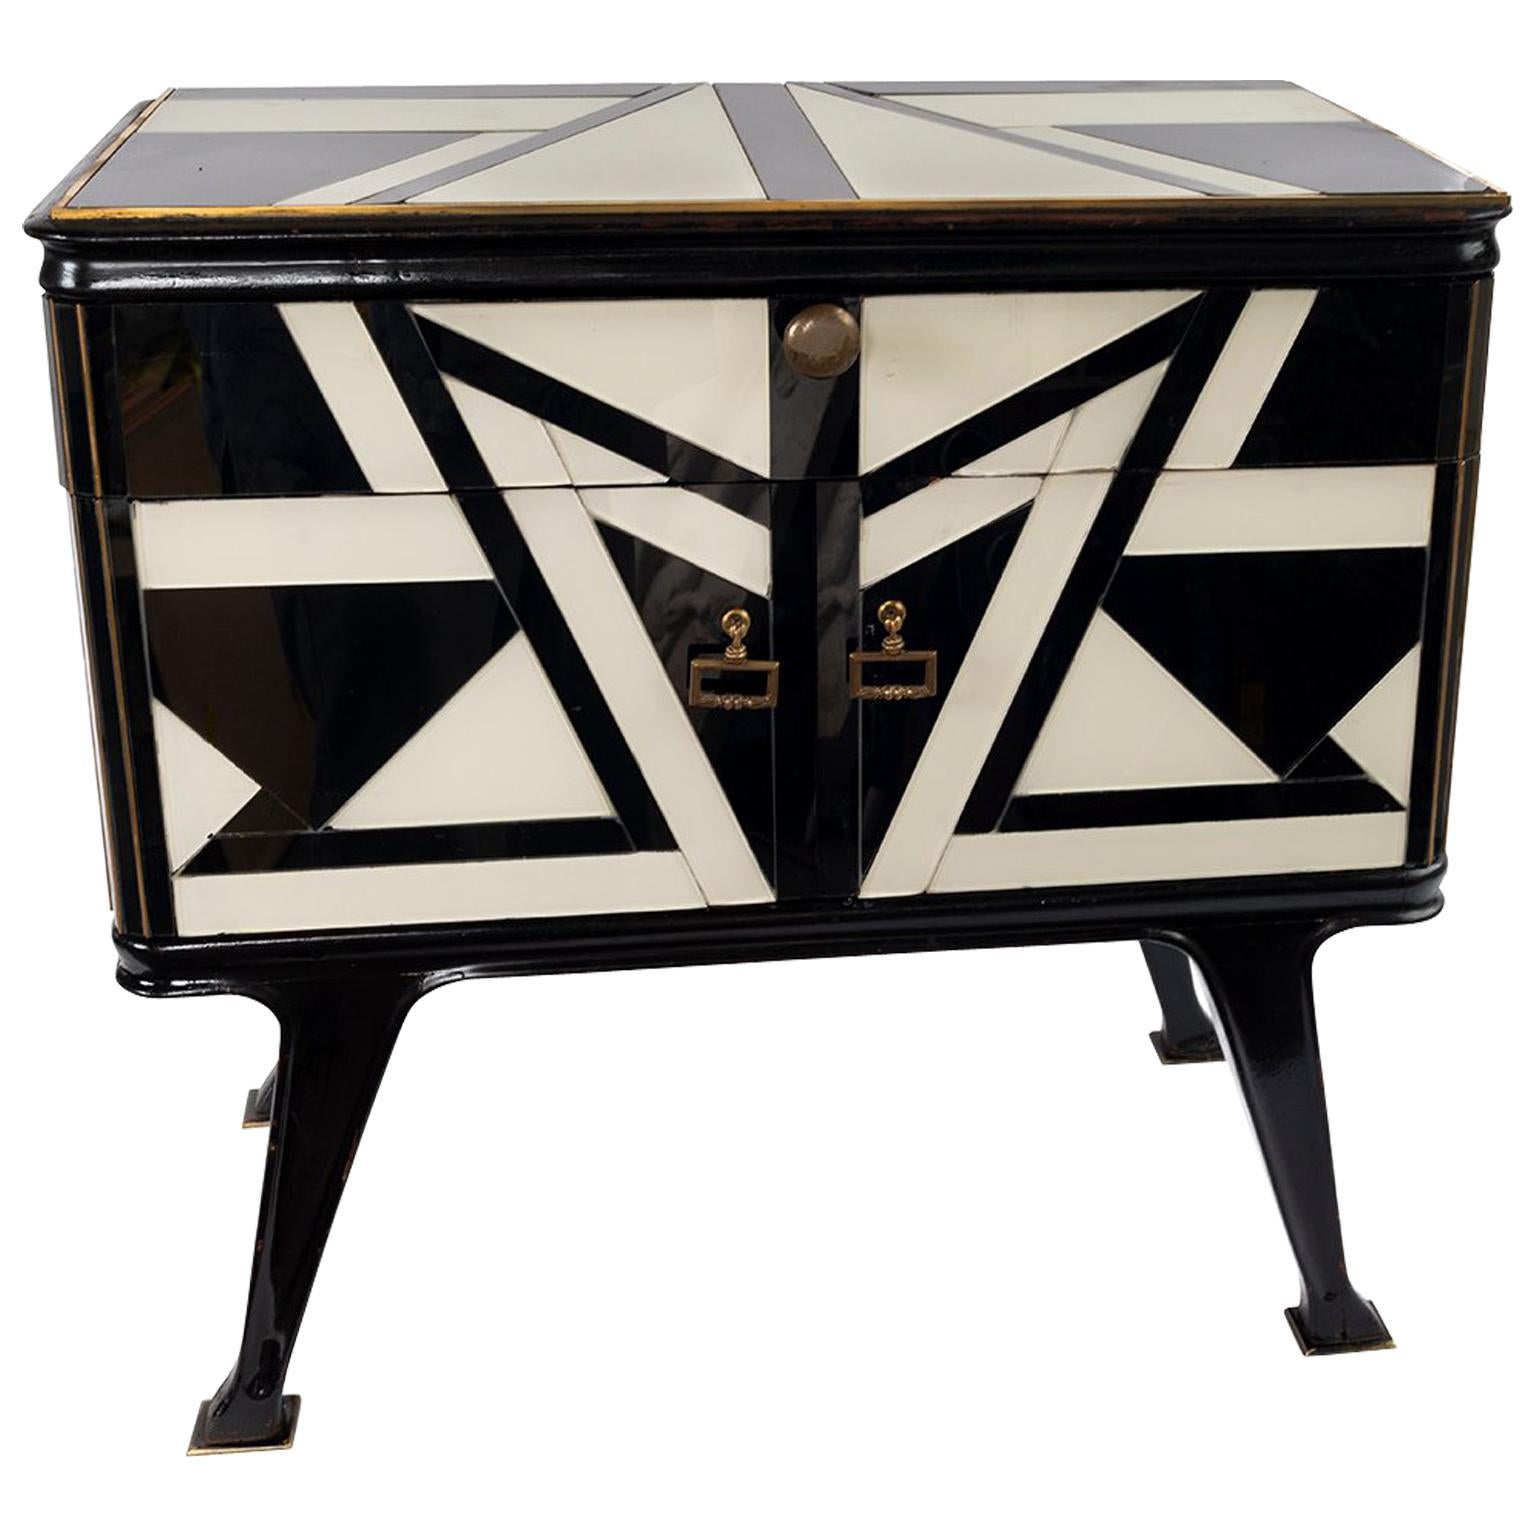 Pair of Black and White Side Tables with a Top Drawer